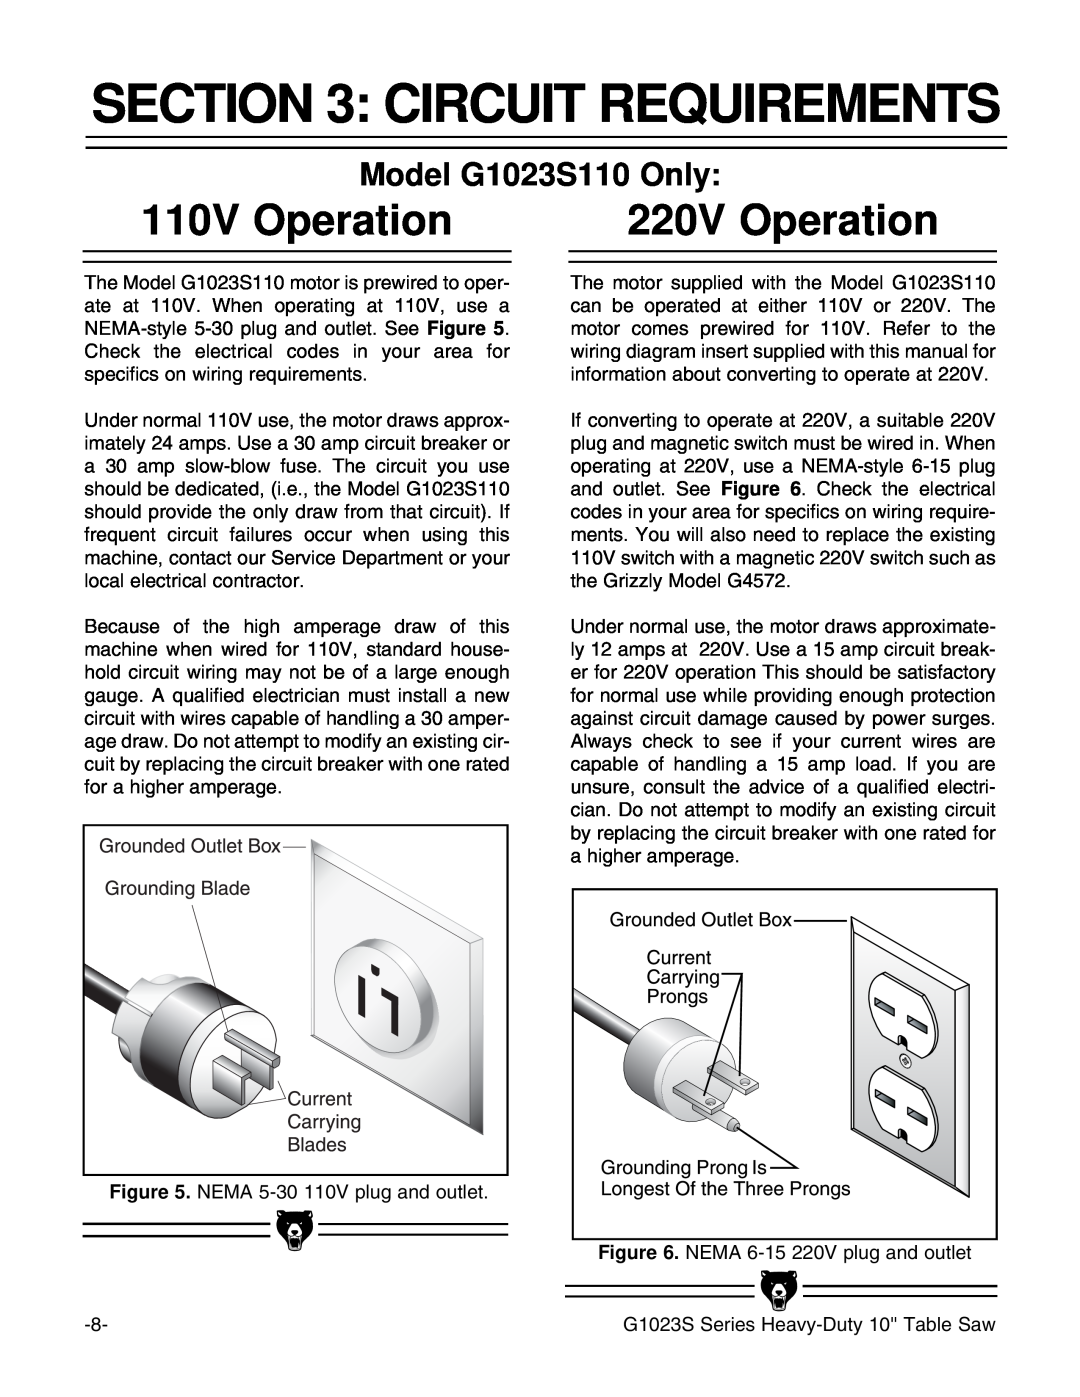 Grizzly MODEL instruction manual Circuit Requirements, 110V Operation, 220V Operation, Model G1023S110 Only 